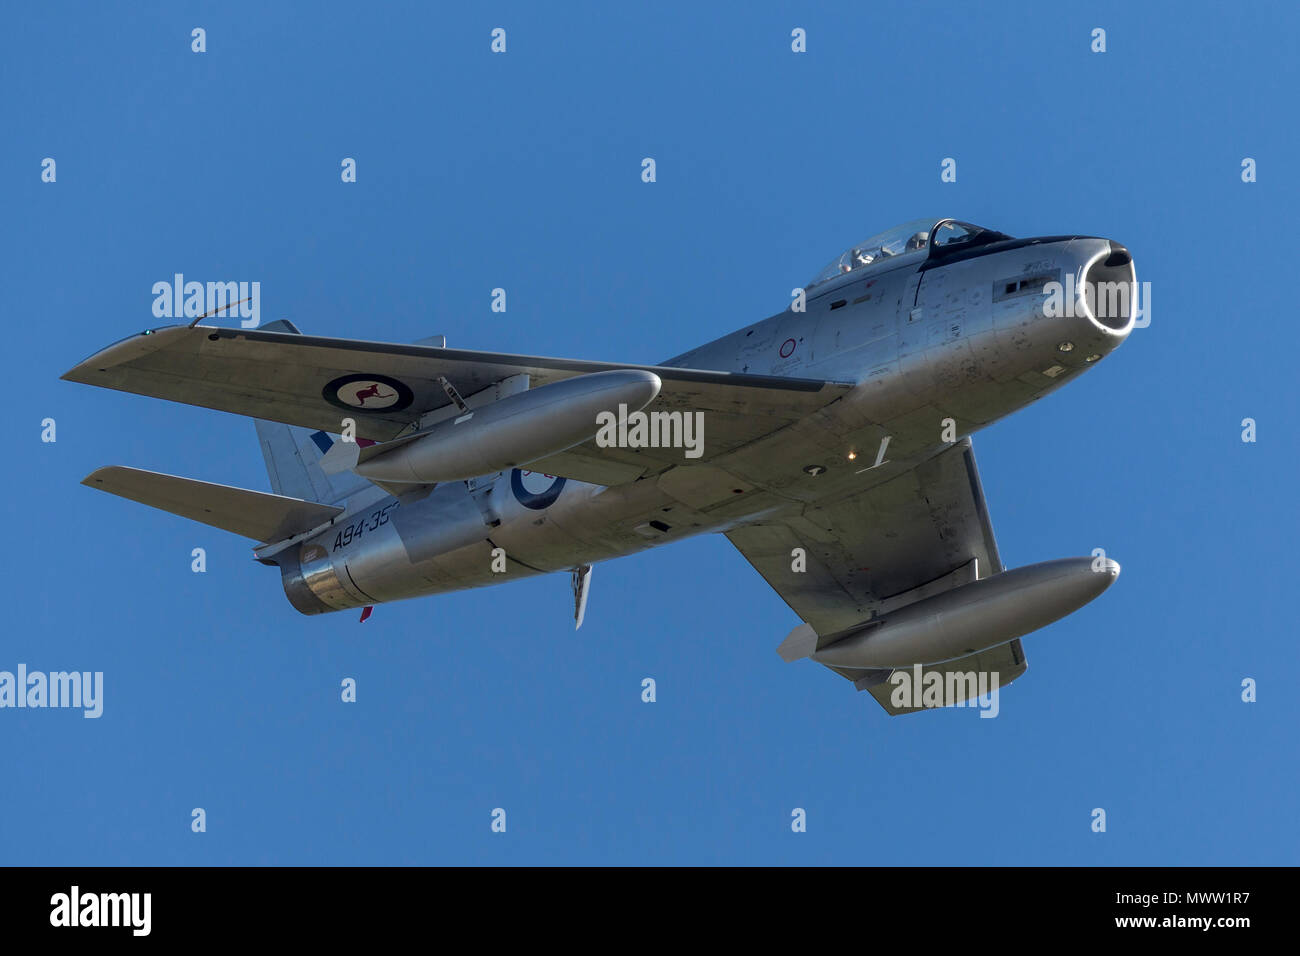 Former Royal Australian Air Force (RAAF) Commonwealth Aircraft Corporation  CA-27 (North American F-86) Sabre jet aircraft Stock Photo - Alamy